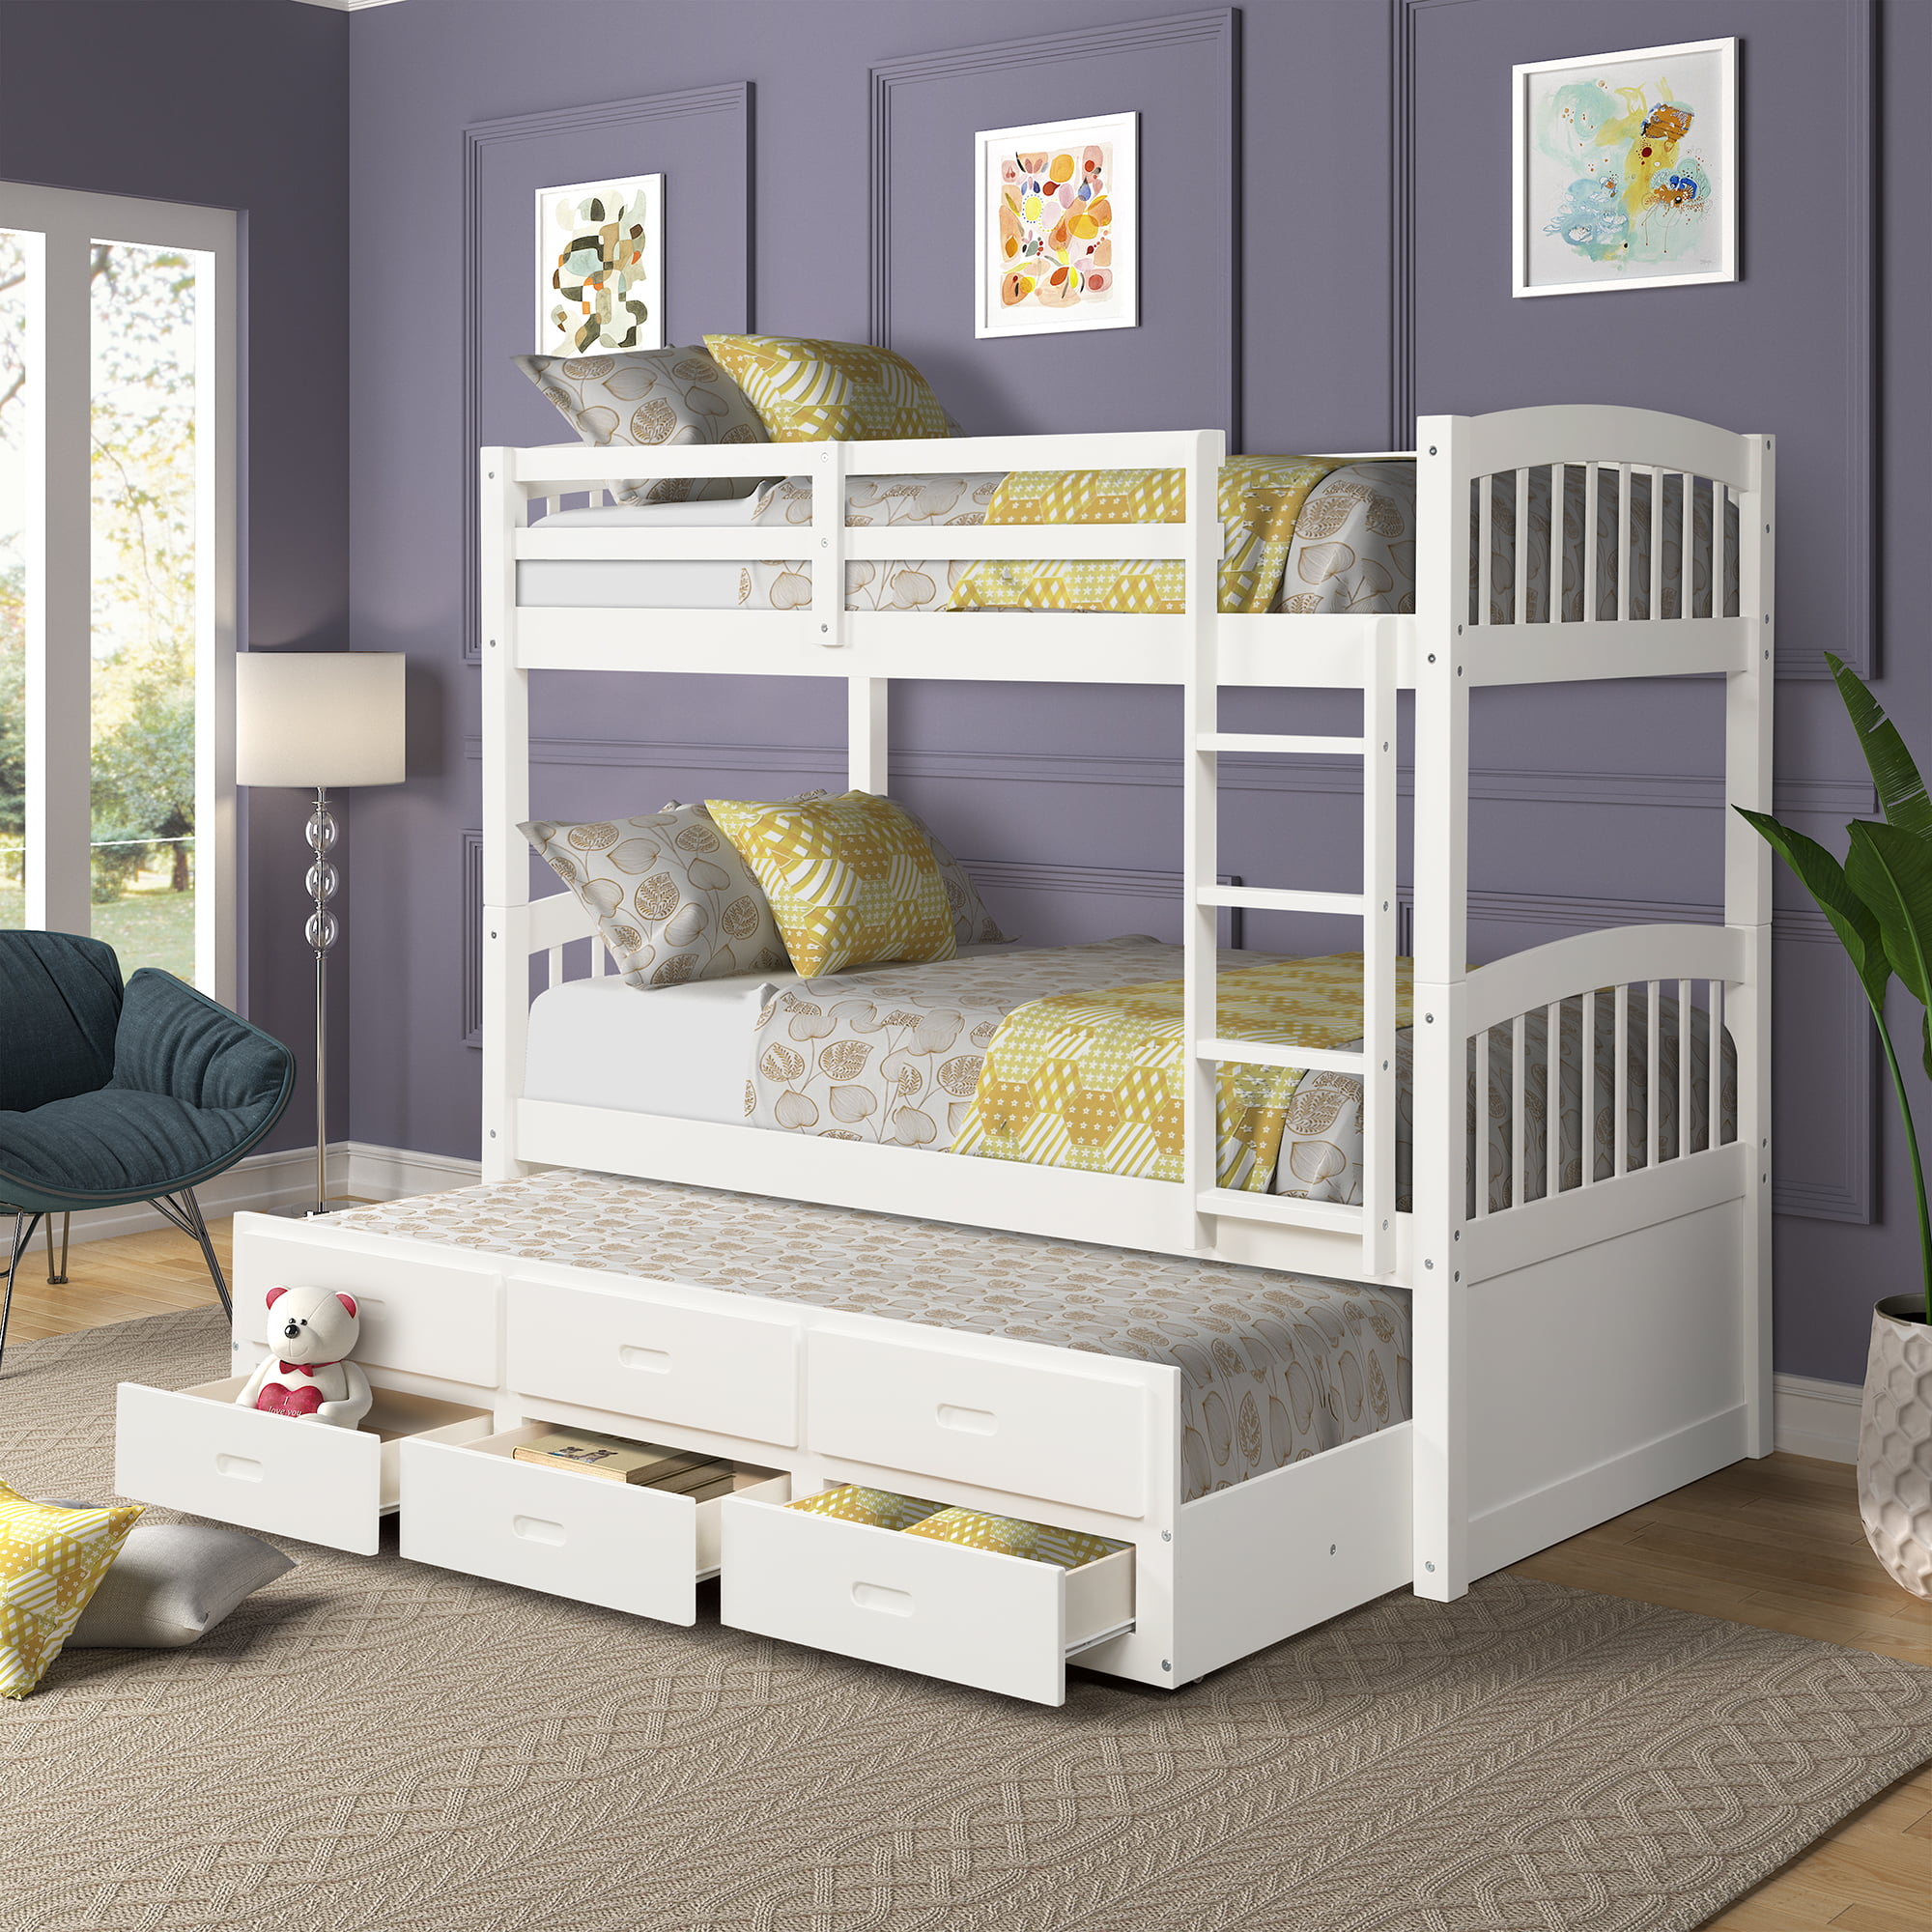 high beds for children